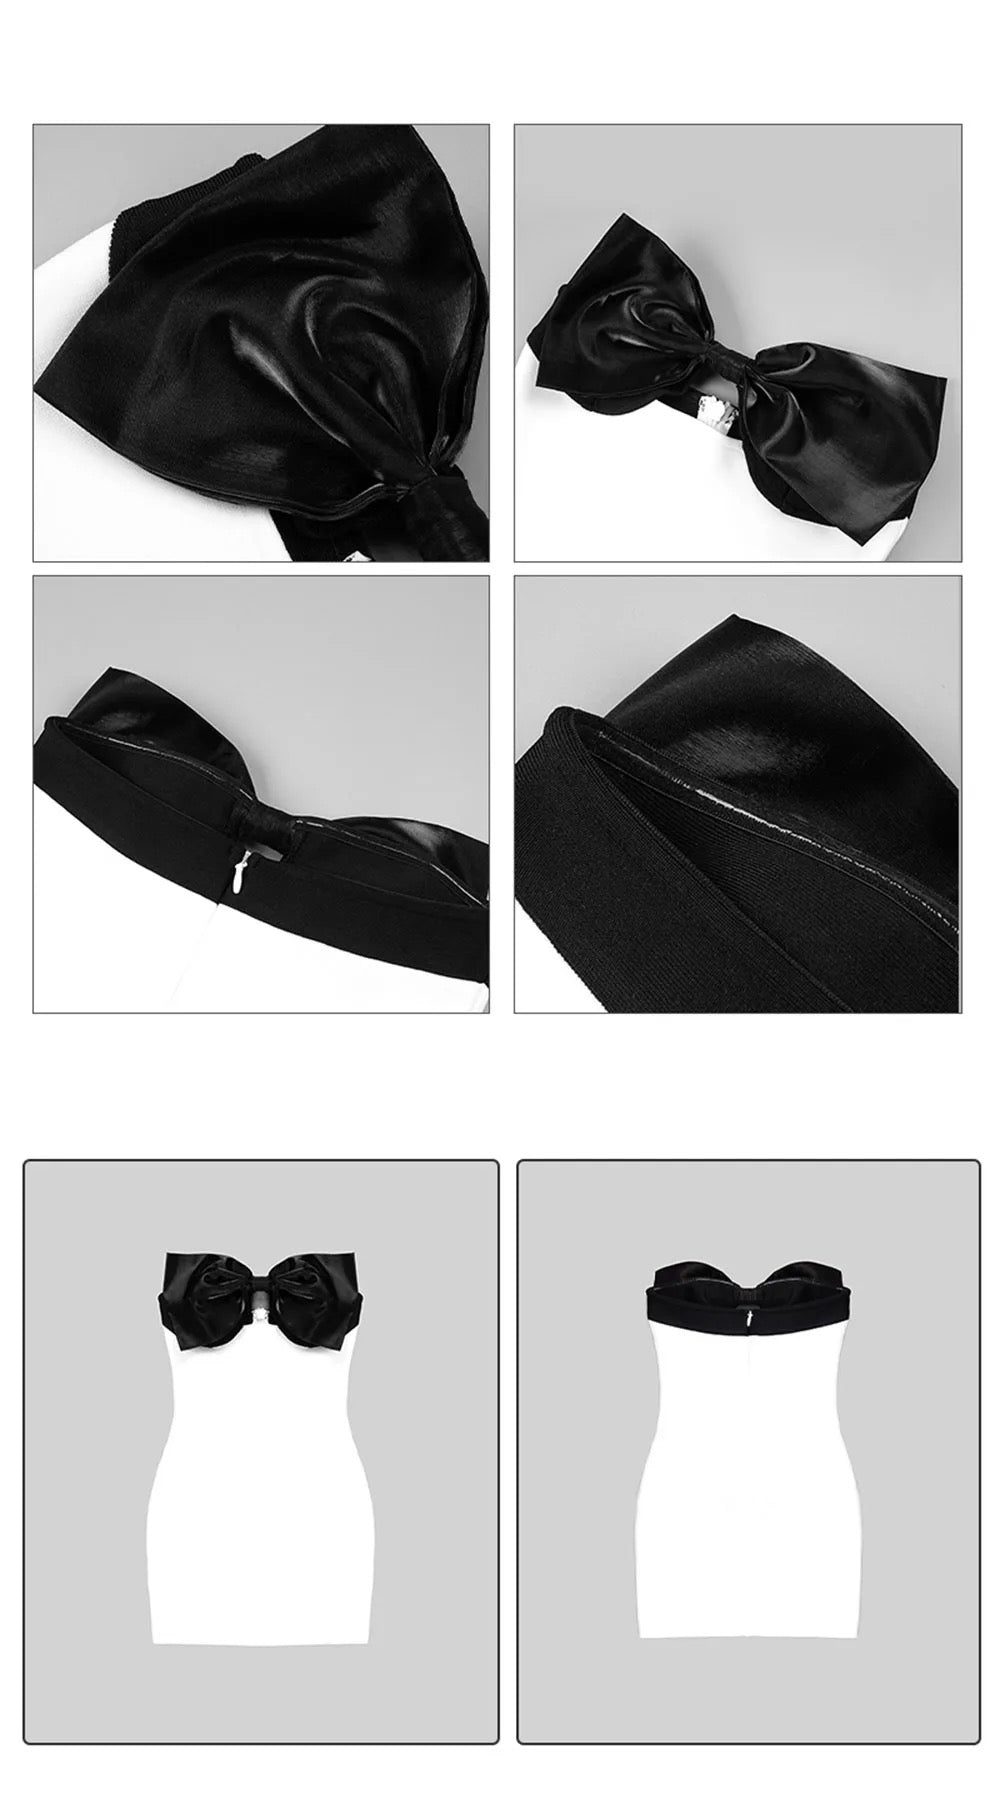 Sexy Strapless Sleeveless Bow Tie Black and White dress REBECATHELABEL